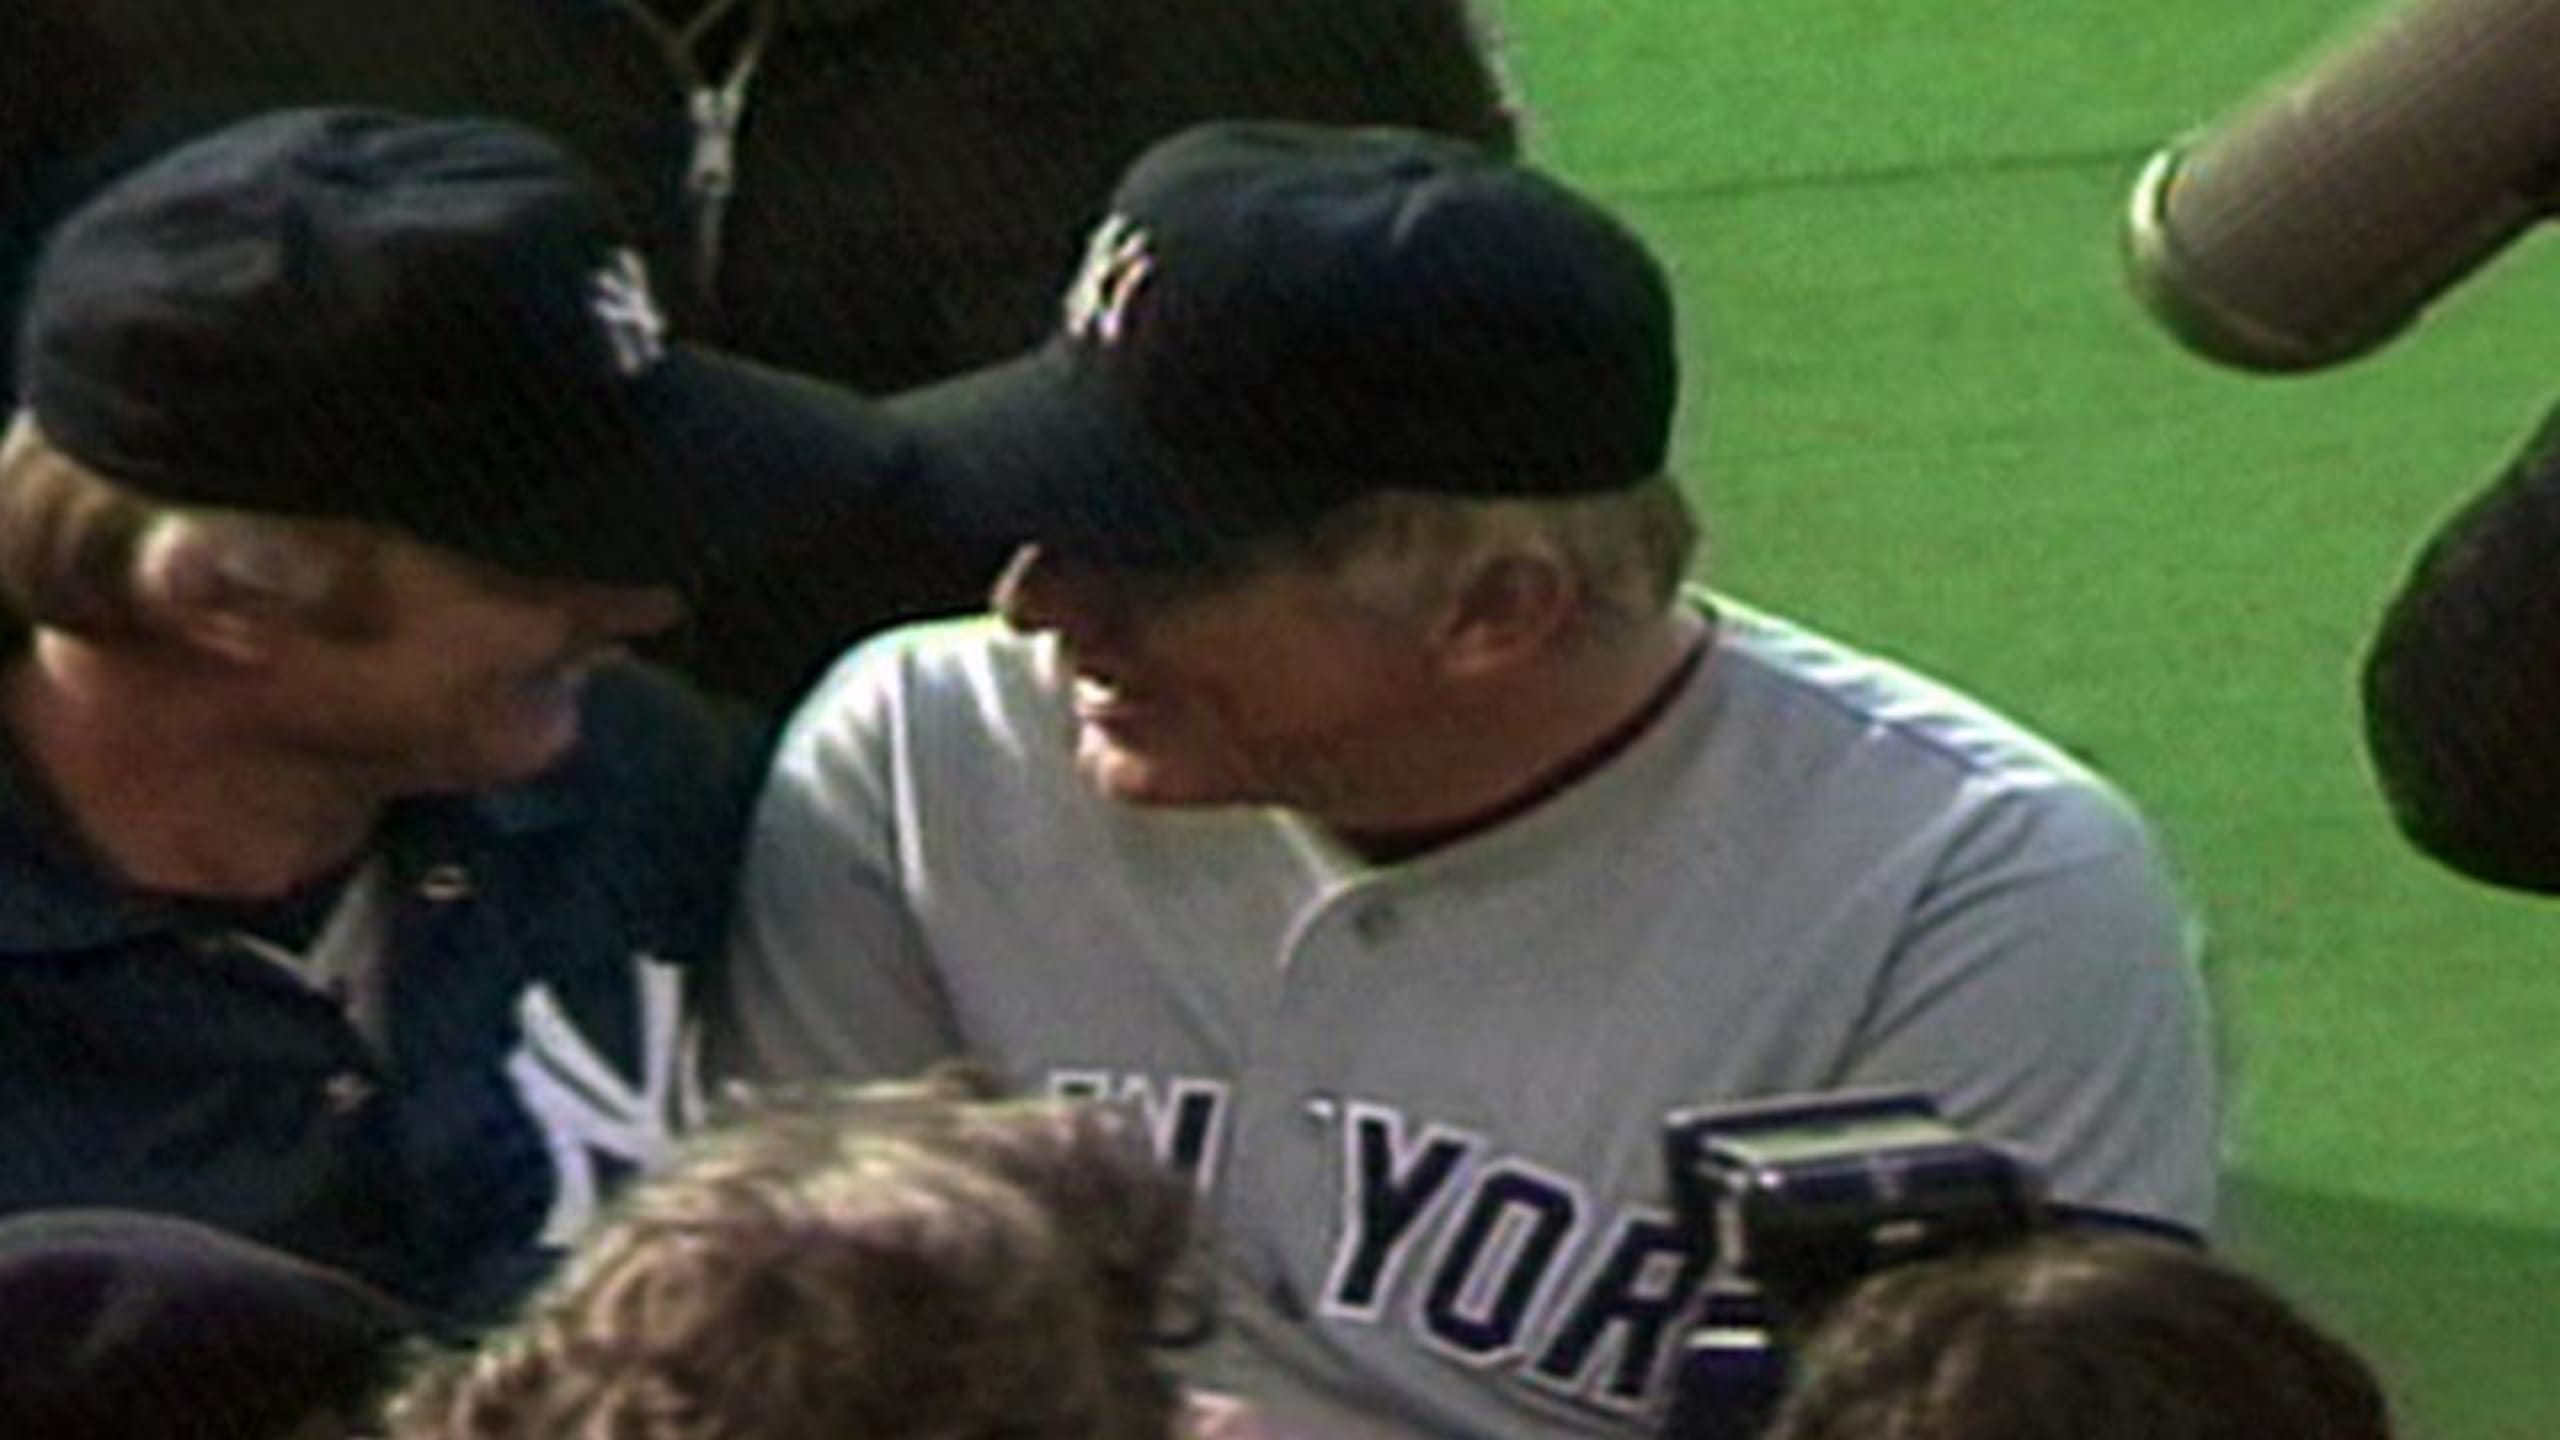 The two things about Phil Niekro that I remember most — and the